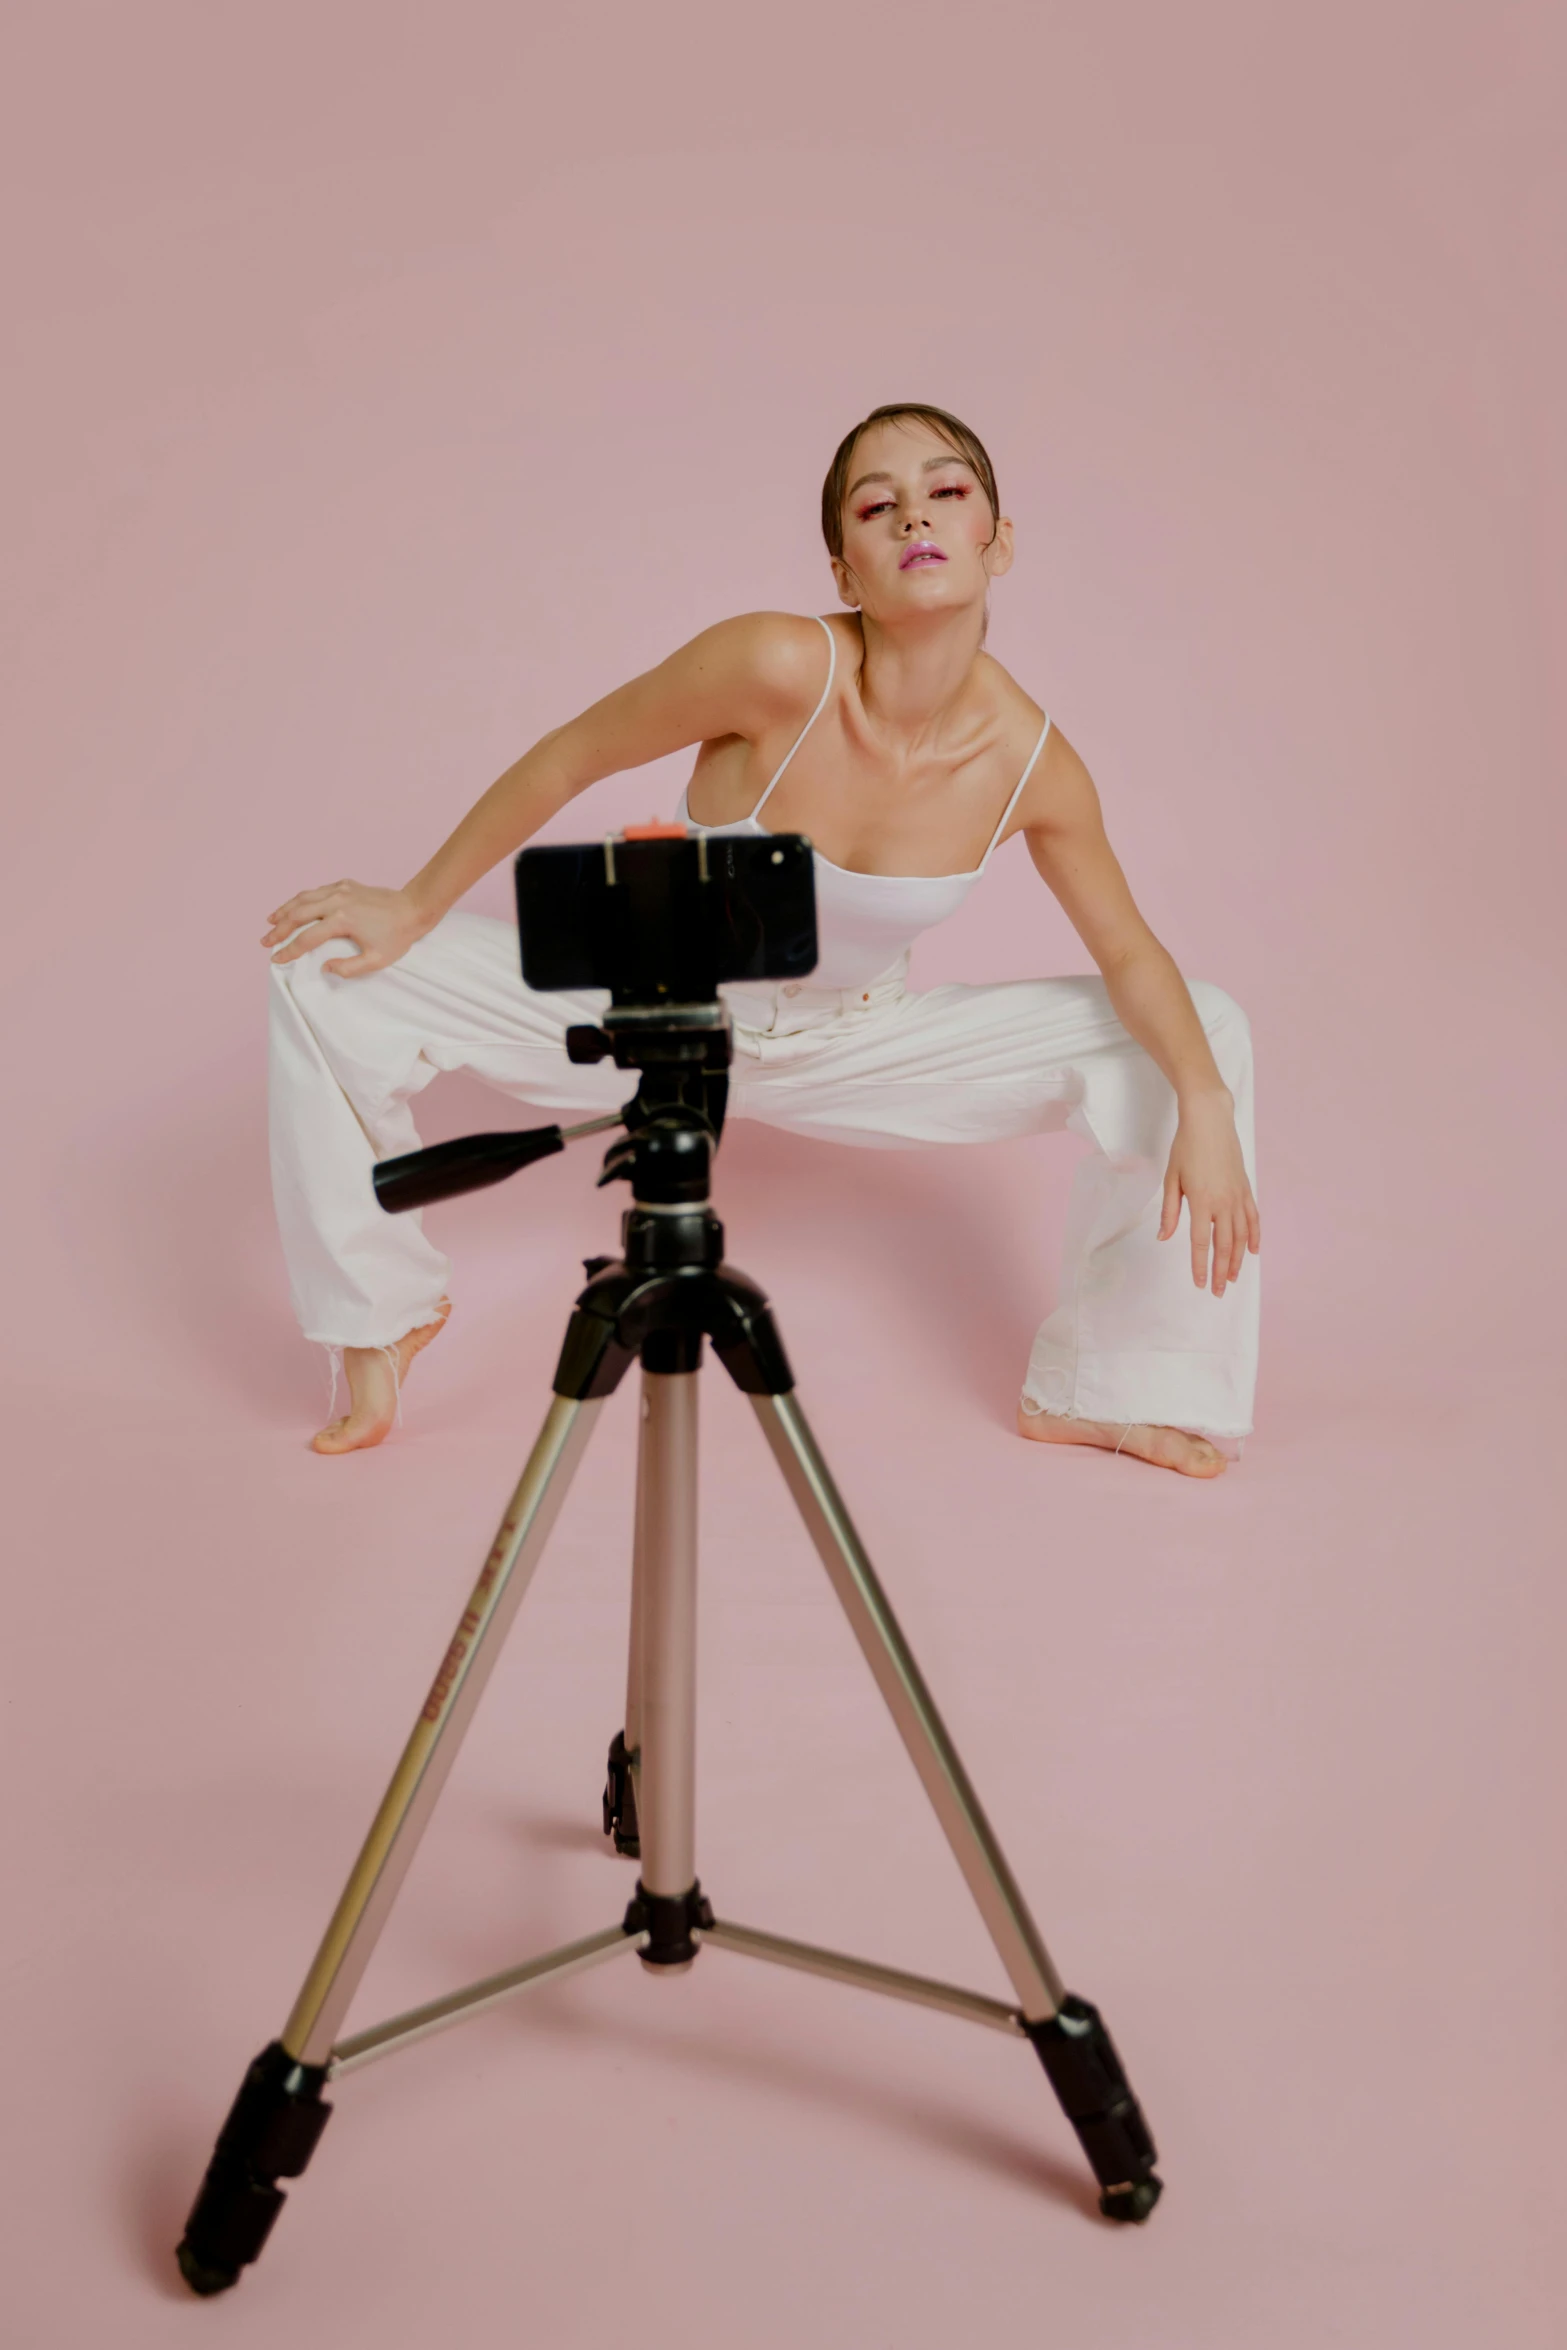 a woman sitting on top of a tripod next to a camera, tendu pose, sydney sweeney, holding it out to the camera, contorted